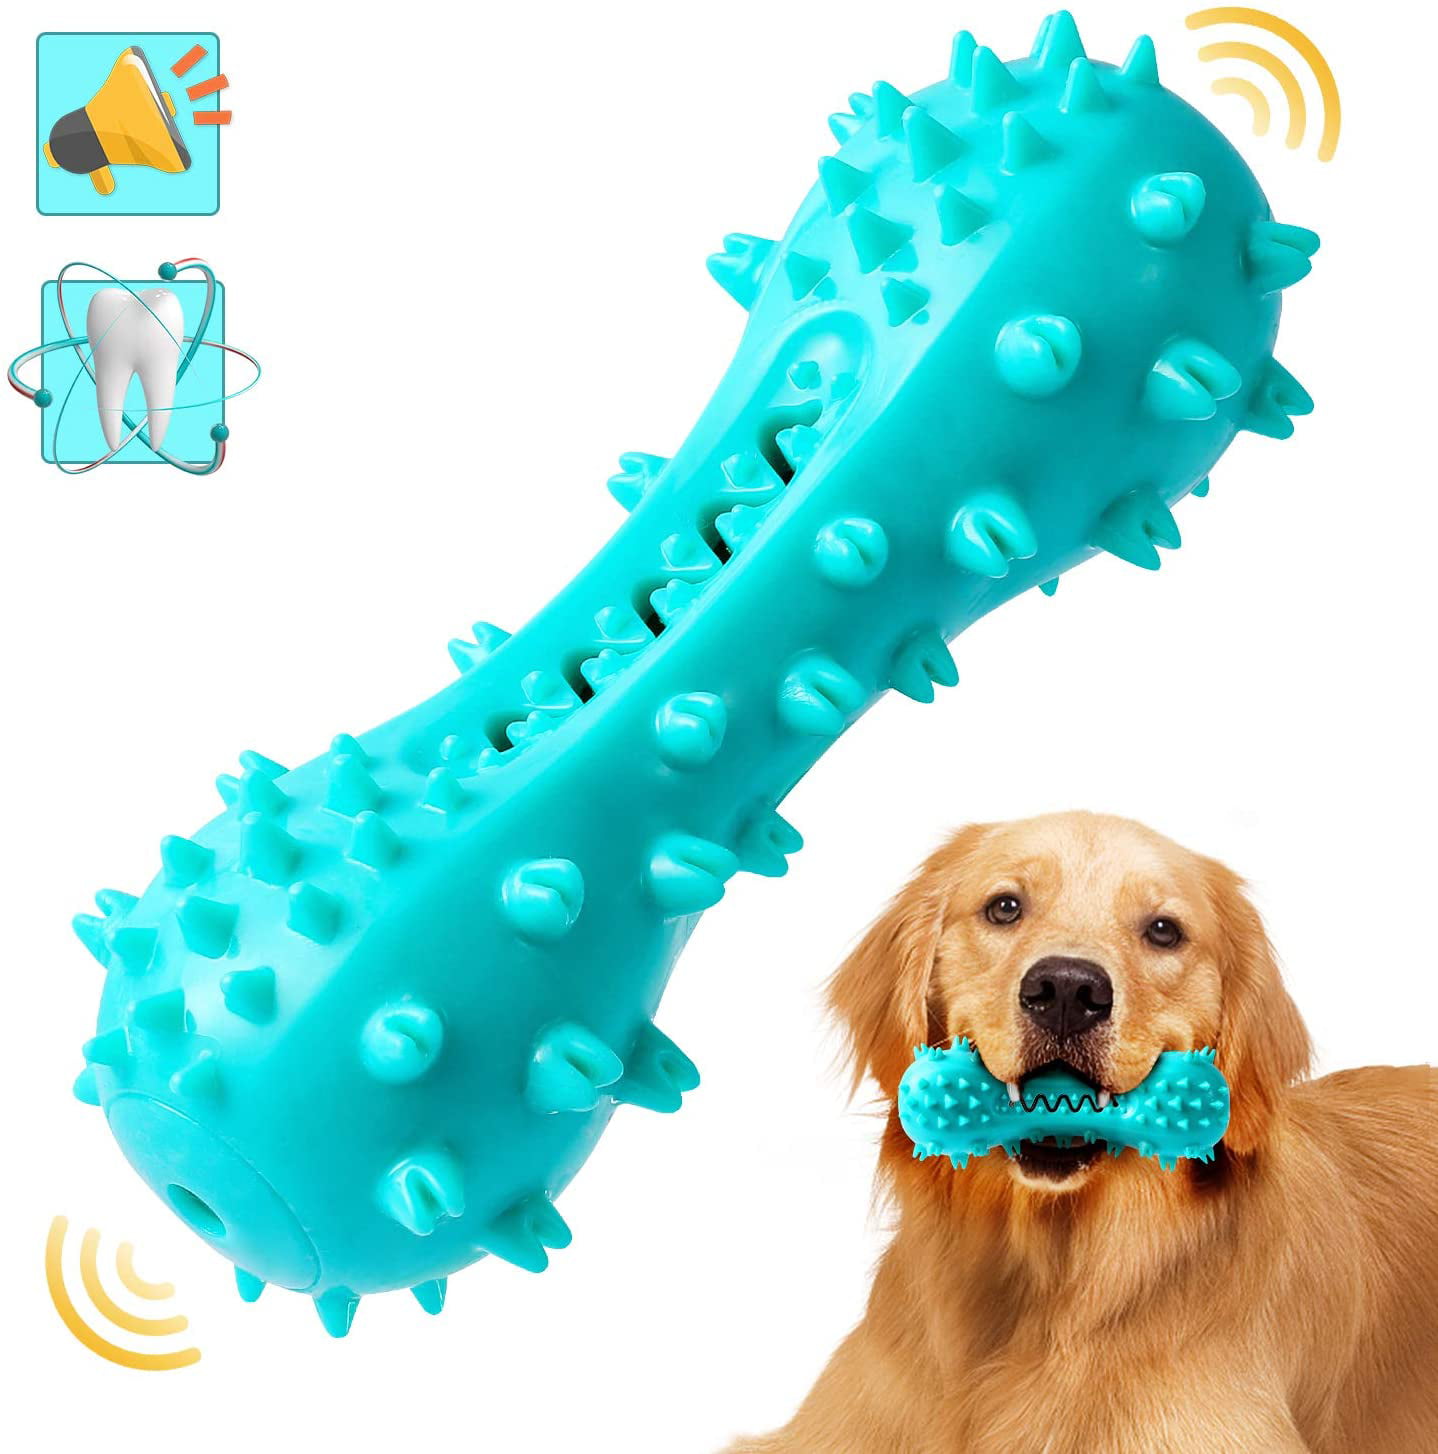 Joytale Dog Toys Indestructible Strong Teeth Cleaning Squeaky Toy for Large/ Medium Dogs,Blue Tough Rubber Chew Toys